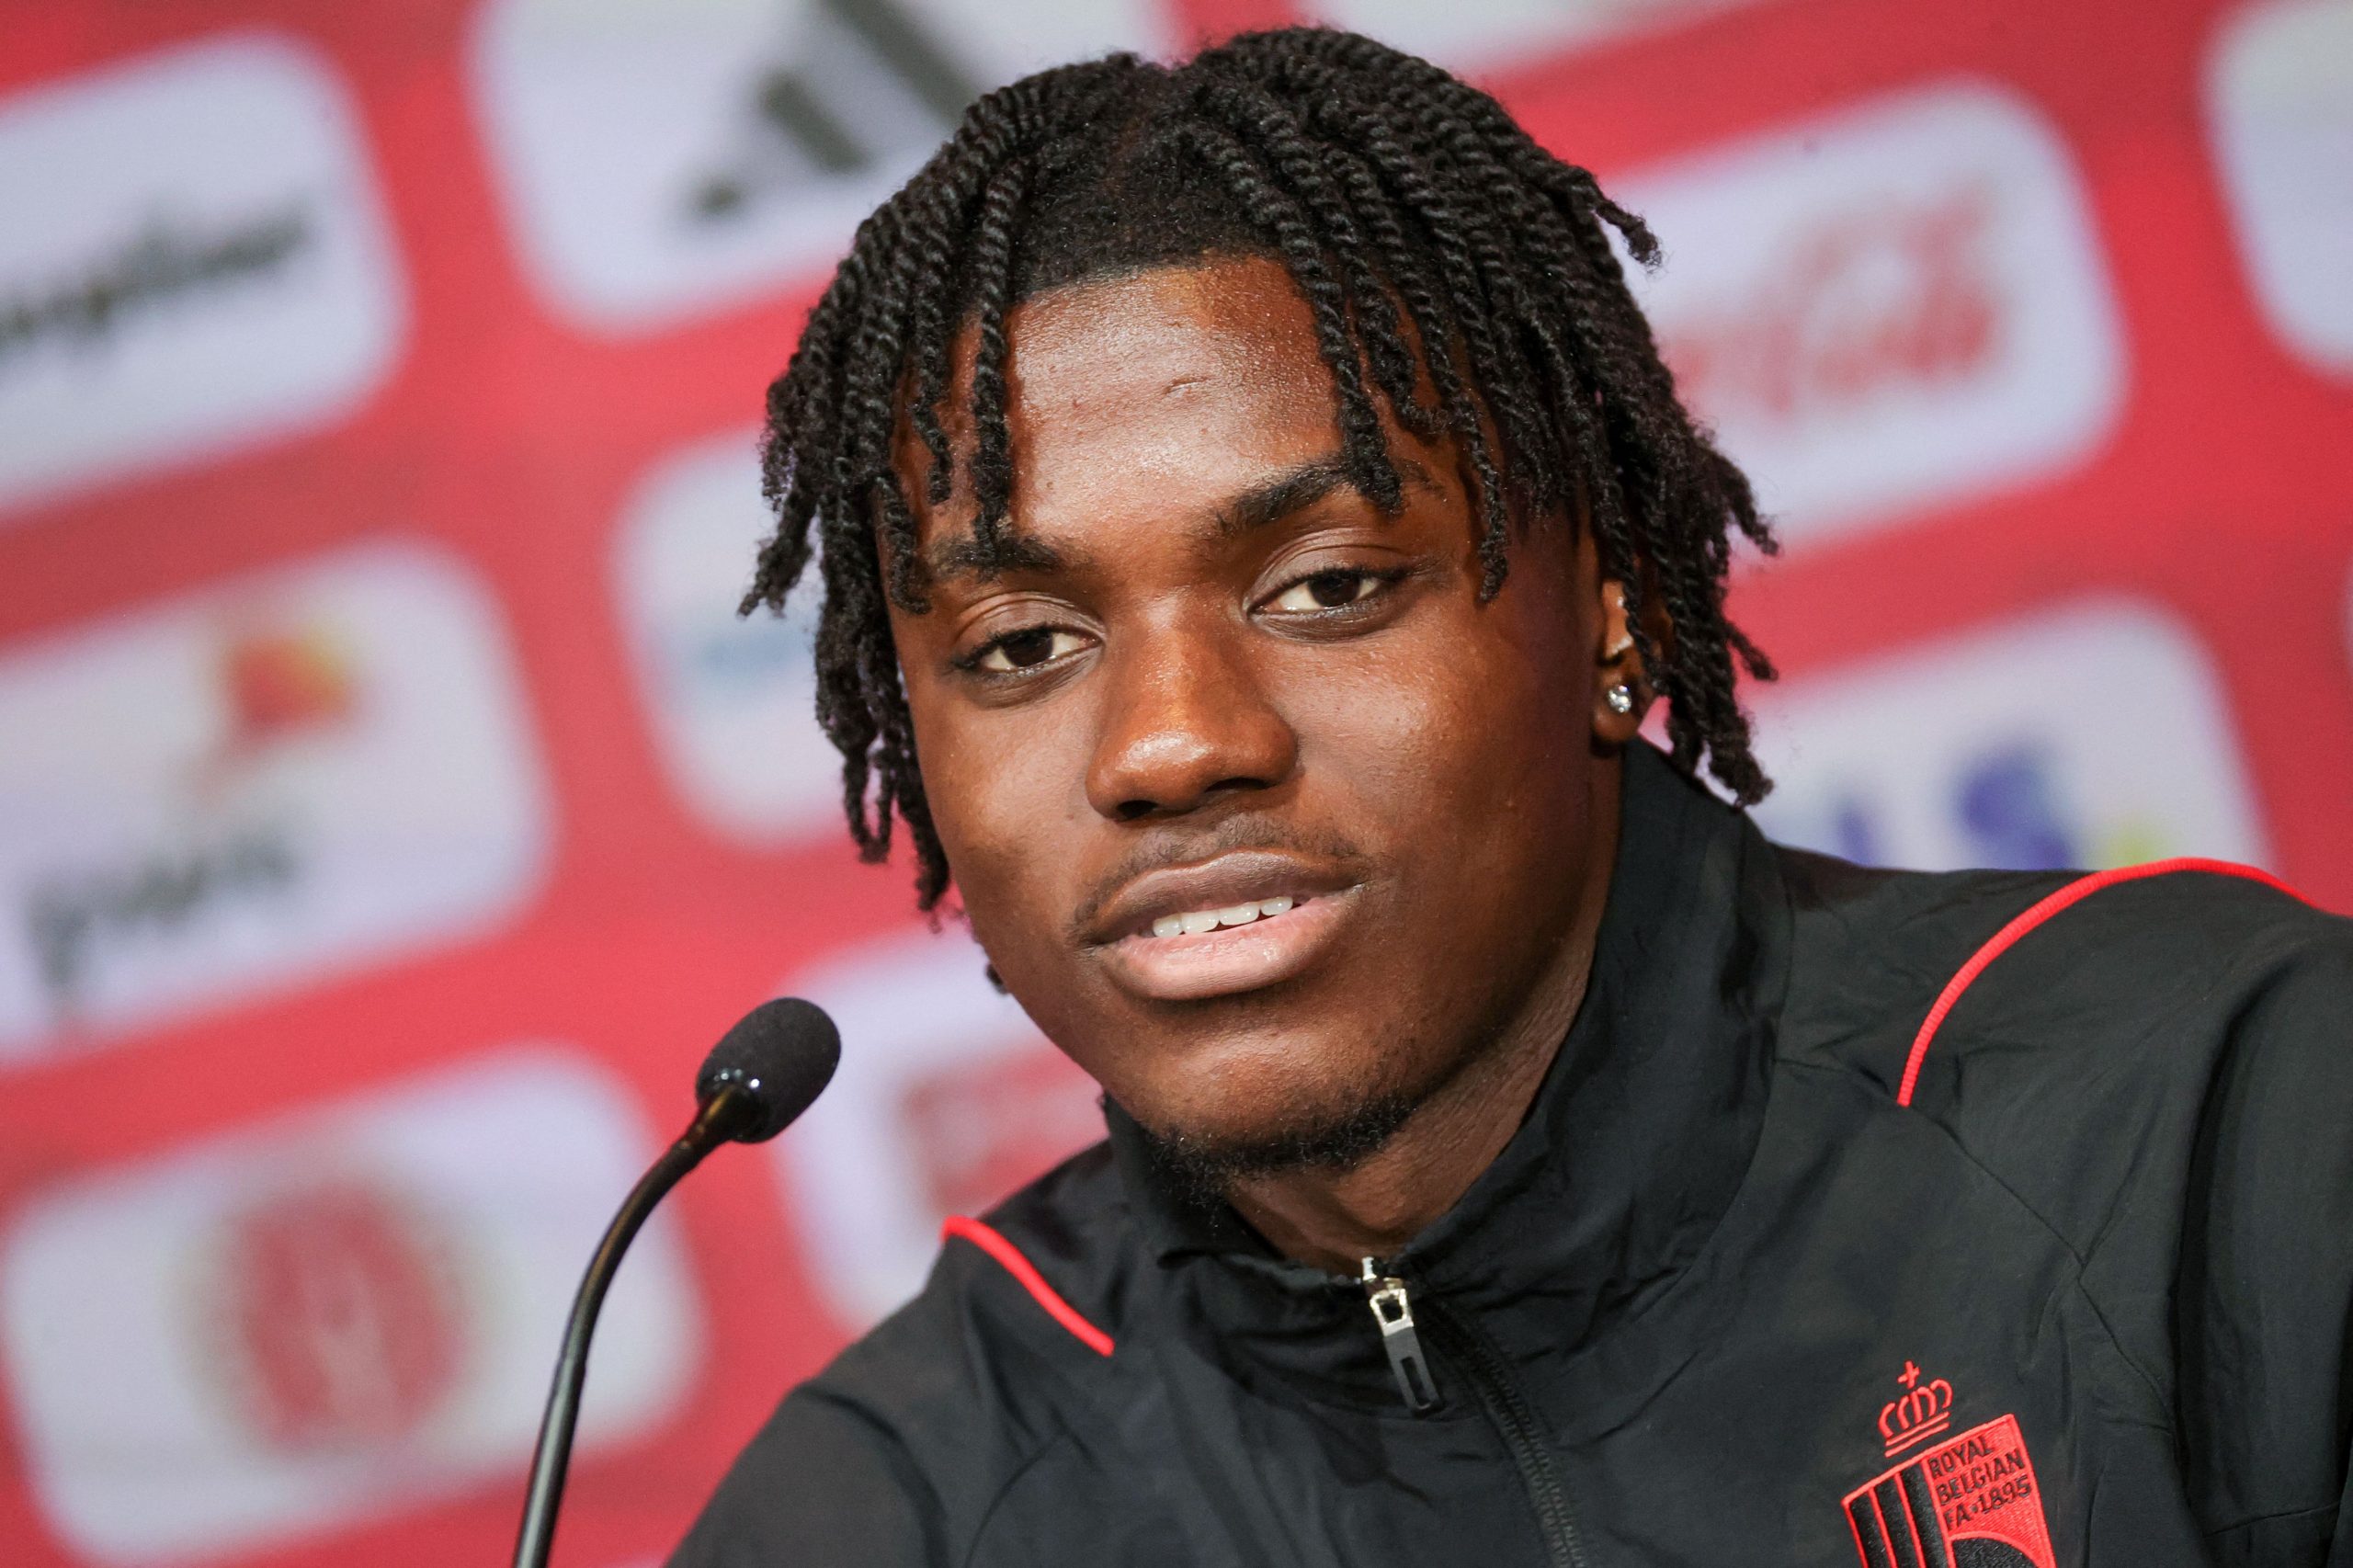 Belgium's midfielder Romeo Lavia attends a press conference of Belgian national team at the Royal Belgian Football Association headquarters in Tubize on March 22, 2023, ahead of their upcoming UEFA Euro 2024 football tournament qualifying matches against Sweden. (Photo by VIRGINIE LEFOUR / Belga / AFP) / Belgium OUT (Photo by VIRGINIE LEFOUR/Belga/AFP via Getty Images)